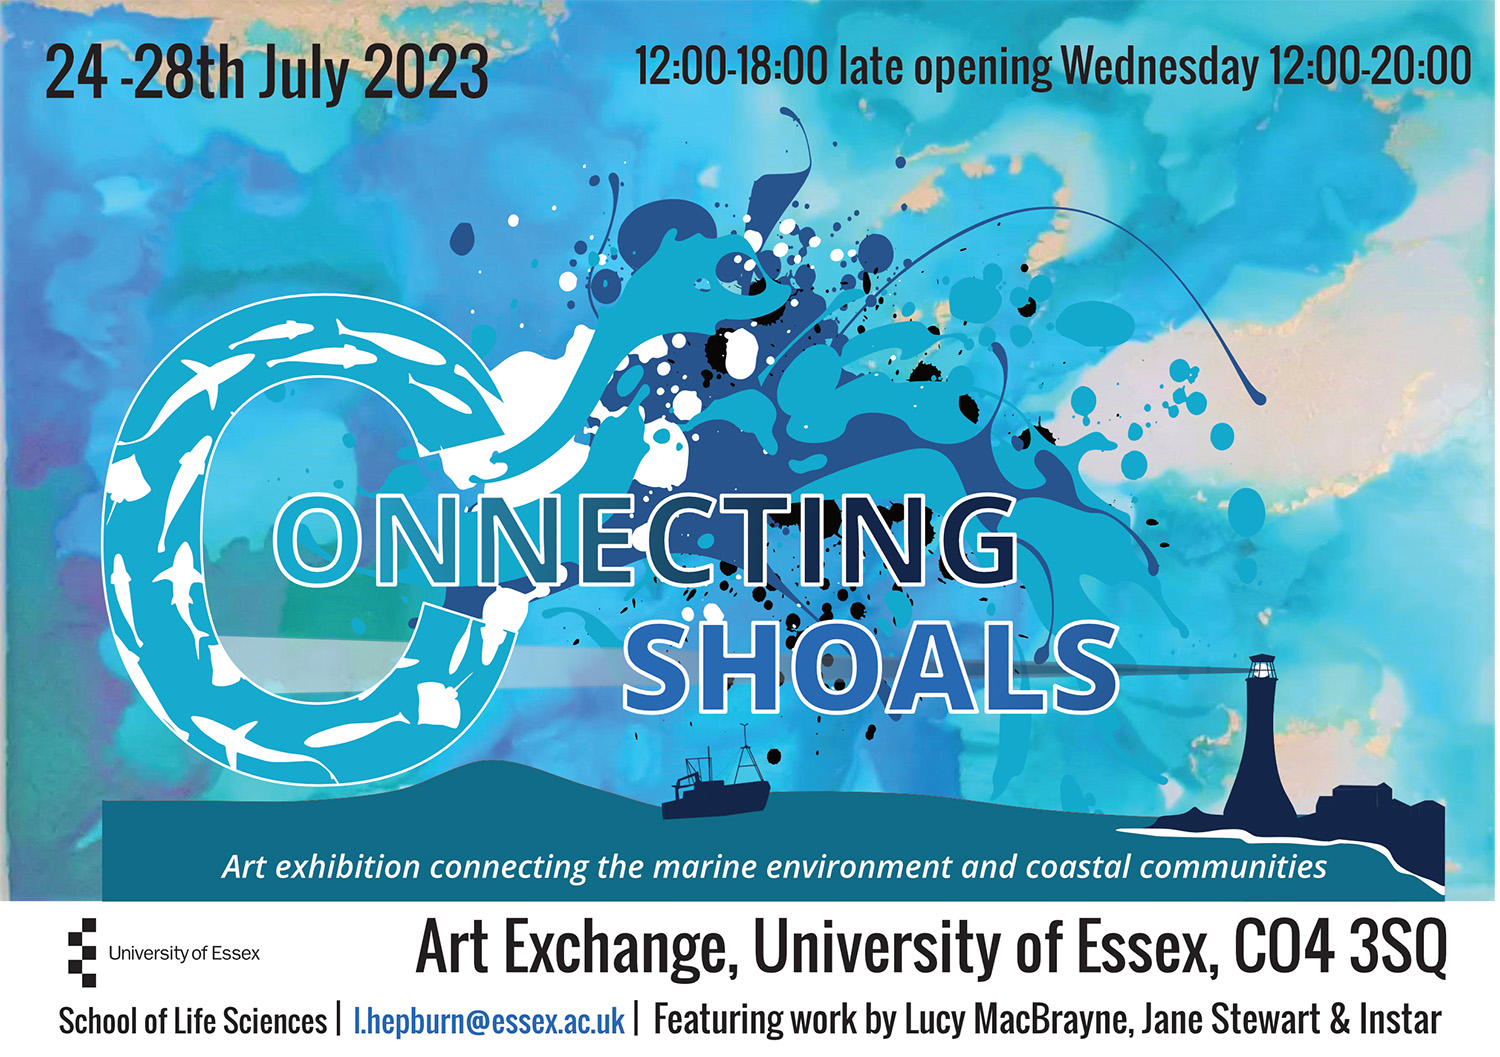 Connecting Shoals - an art exhibition connecting the marine environment with coastal communities